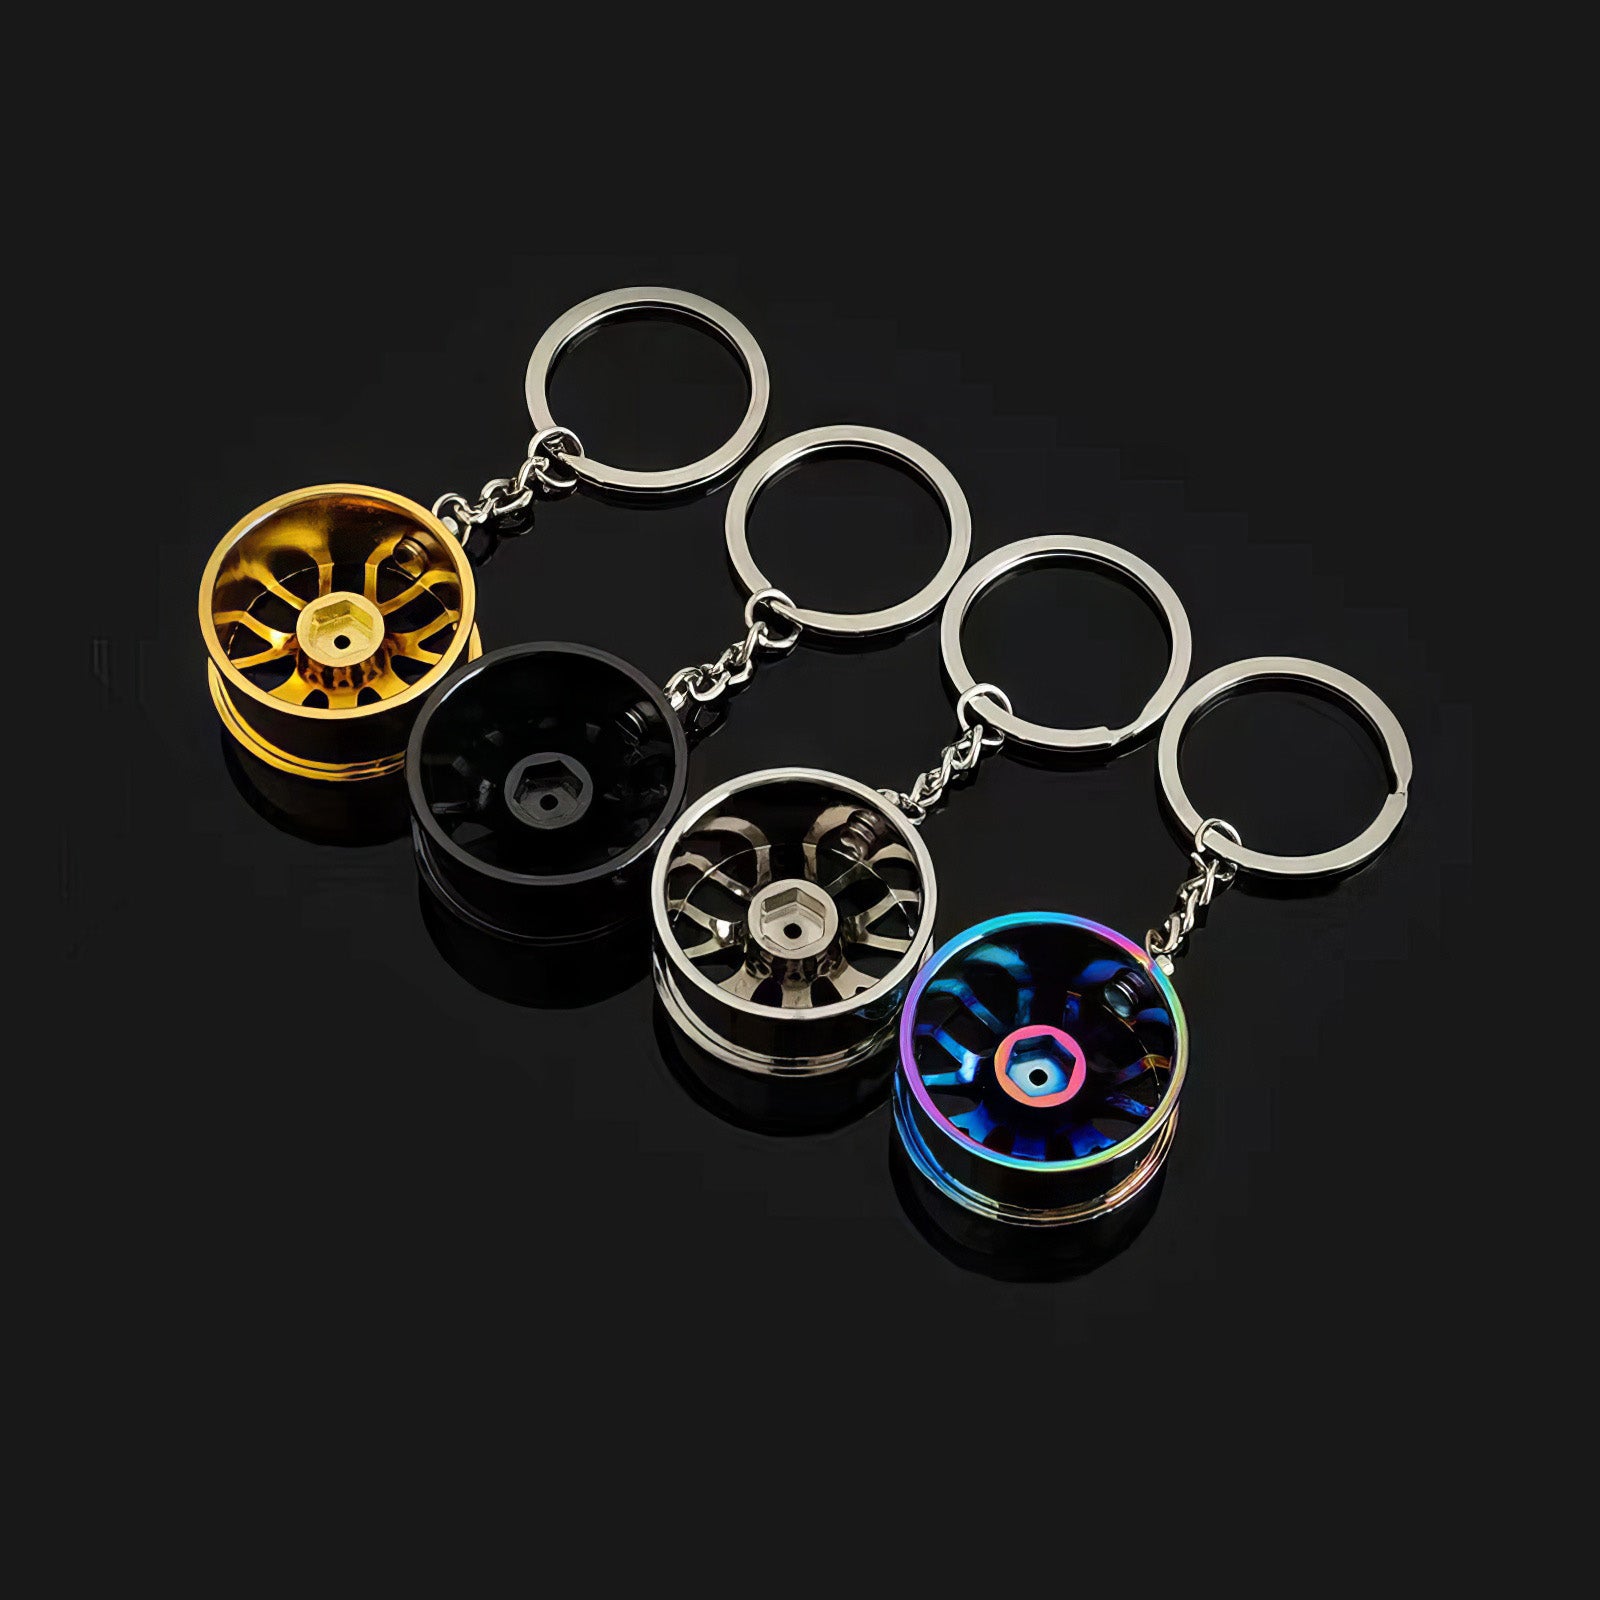 Concave wheel keychain in neochrome, black, silver, and gold variants.